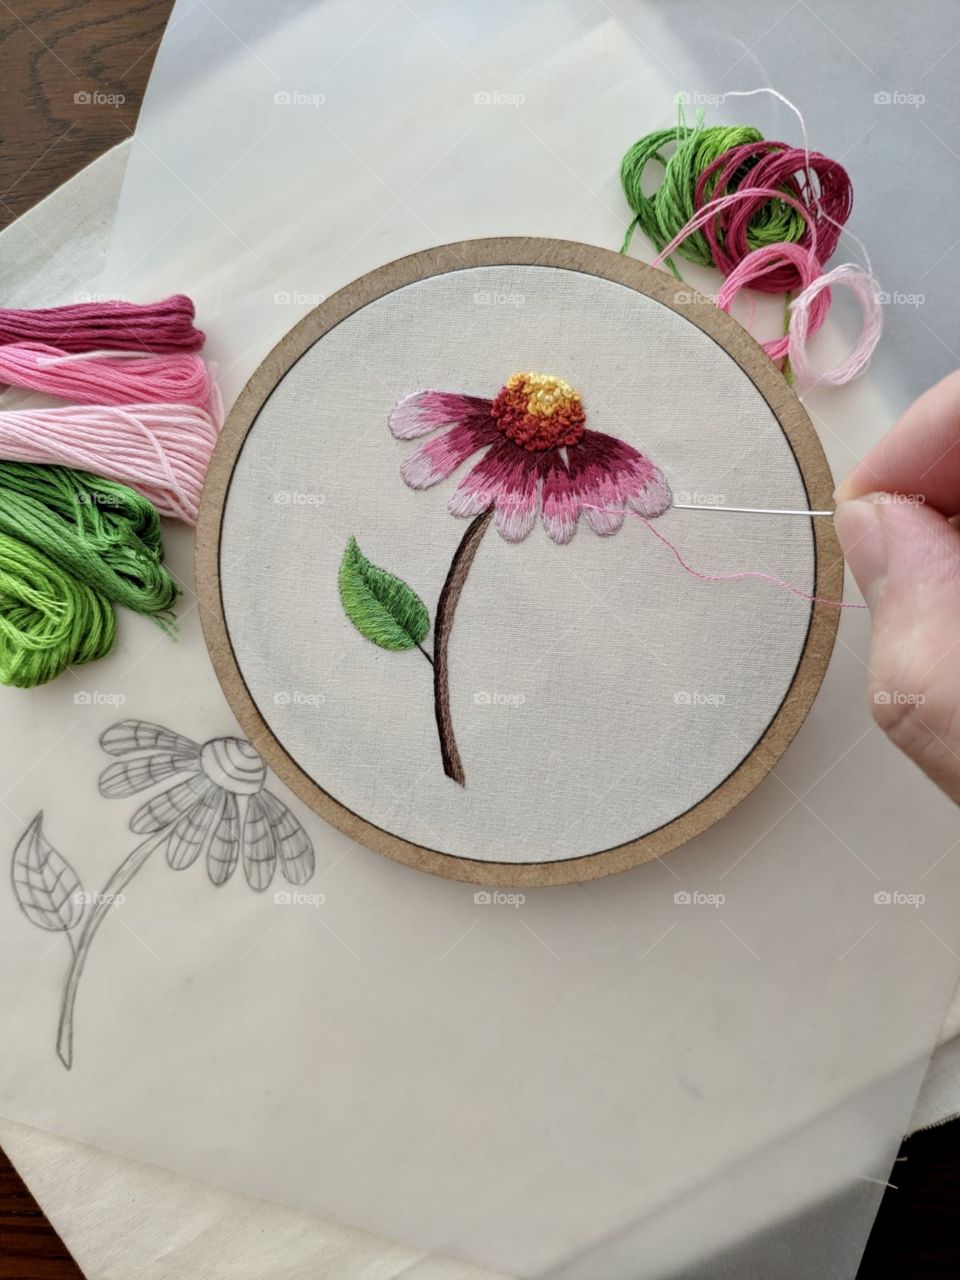 Making art! A pink flower made with hand embroidery and the lines and scratches used to make it 